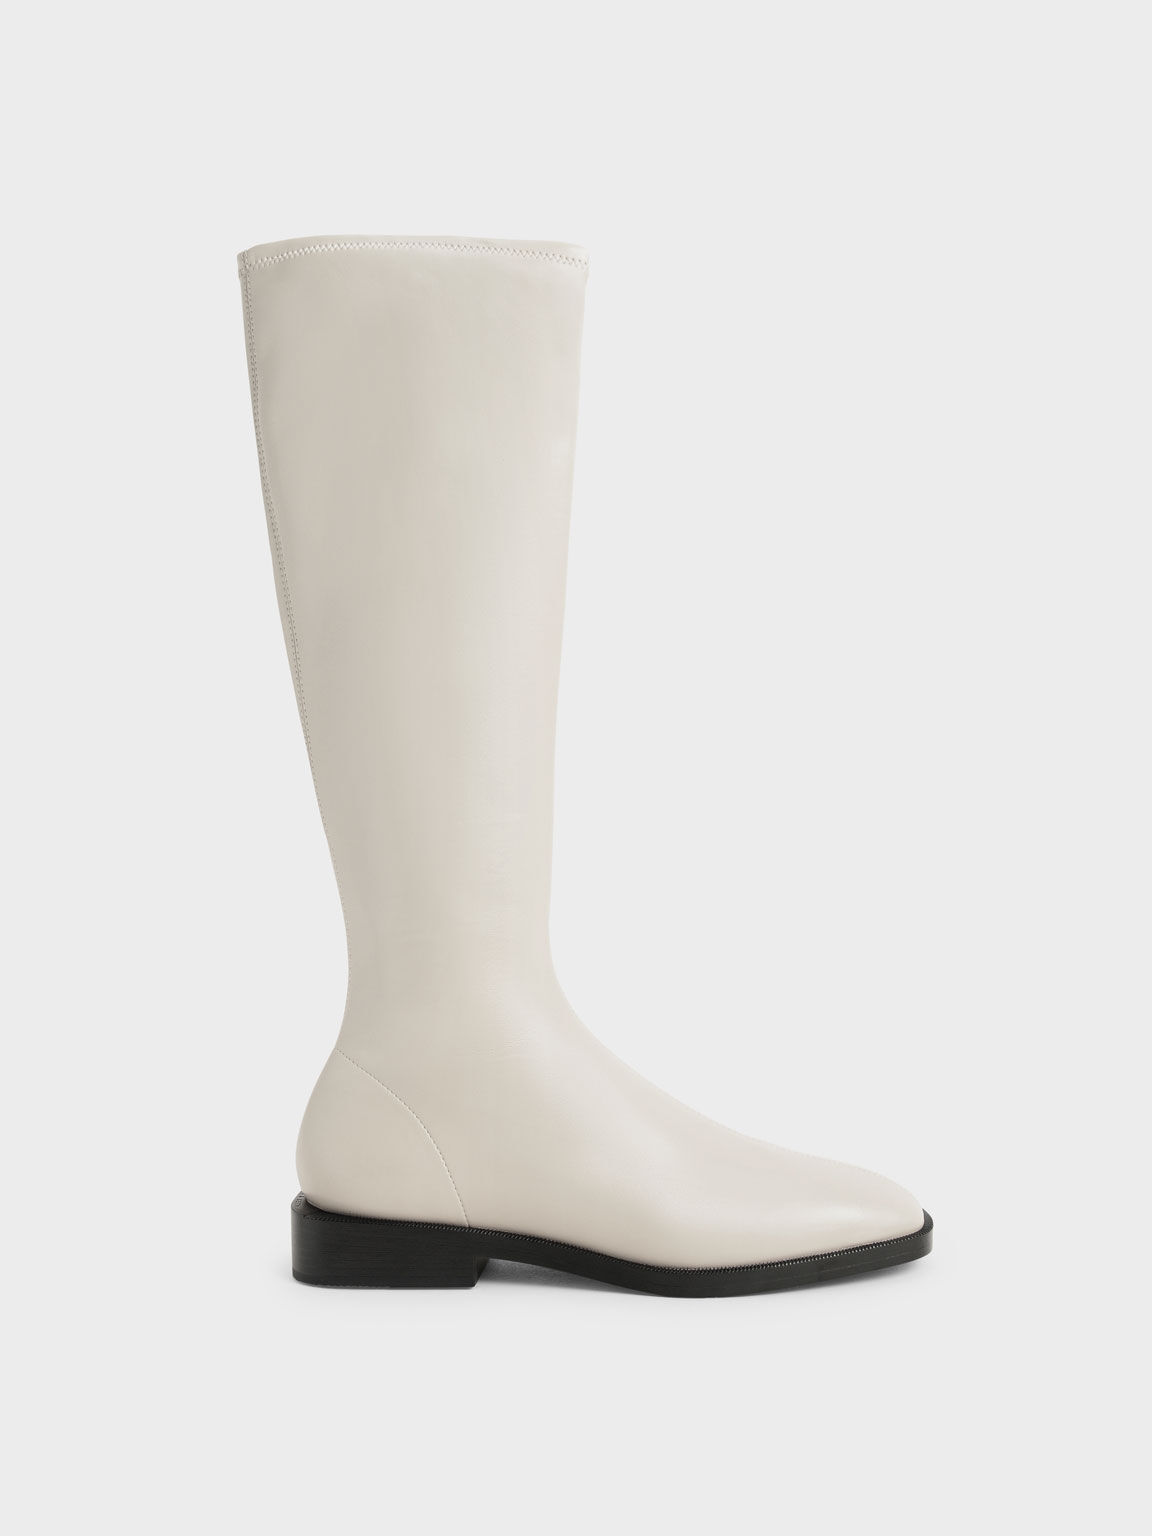 Women's Boots | Shop Exclusive Styles | CHARLES & KEITH CA